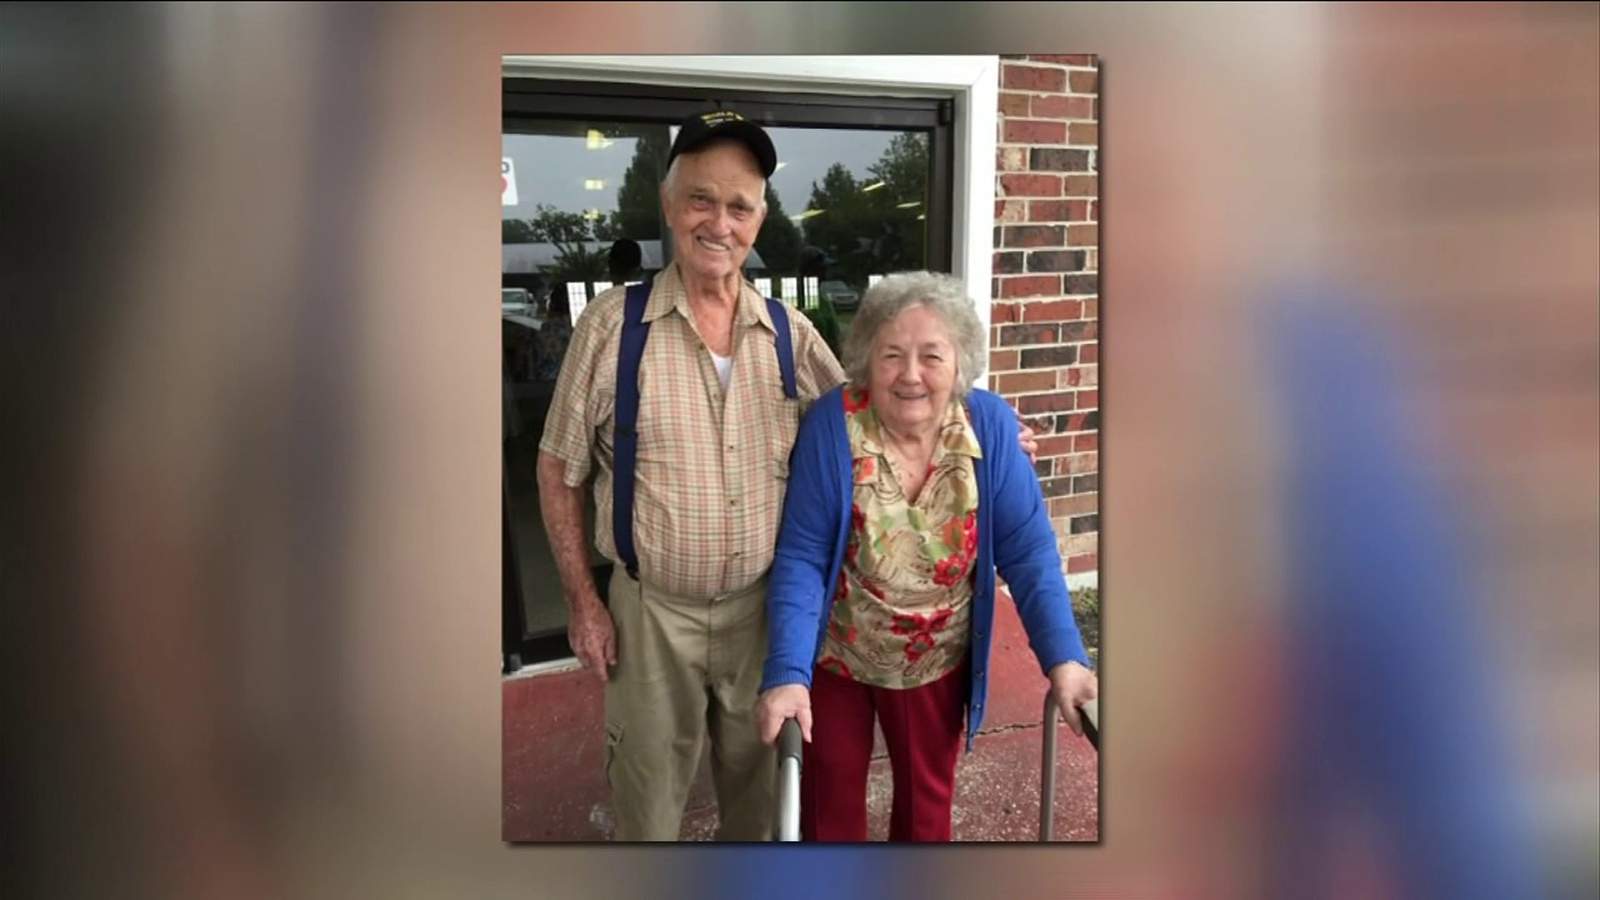 Family opens up about couple featured in viral video